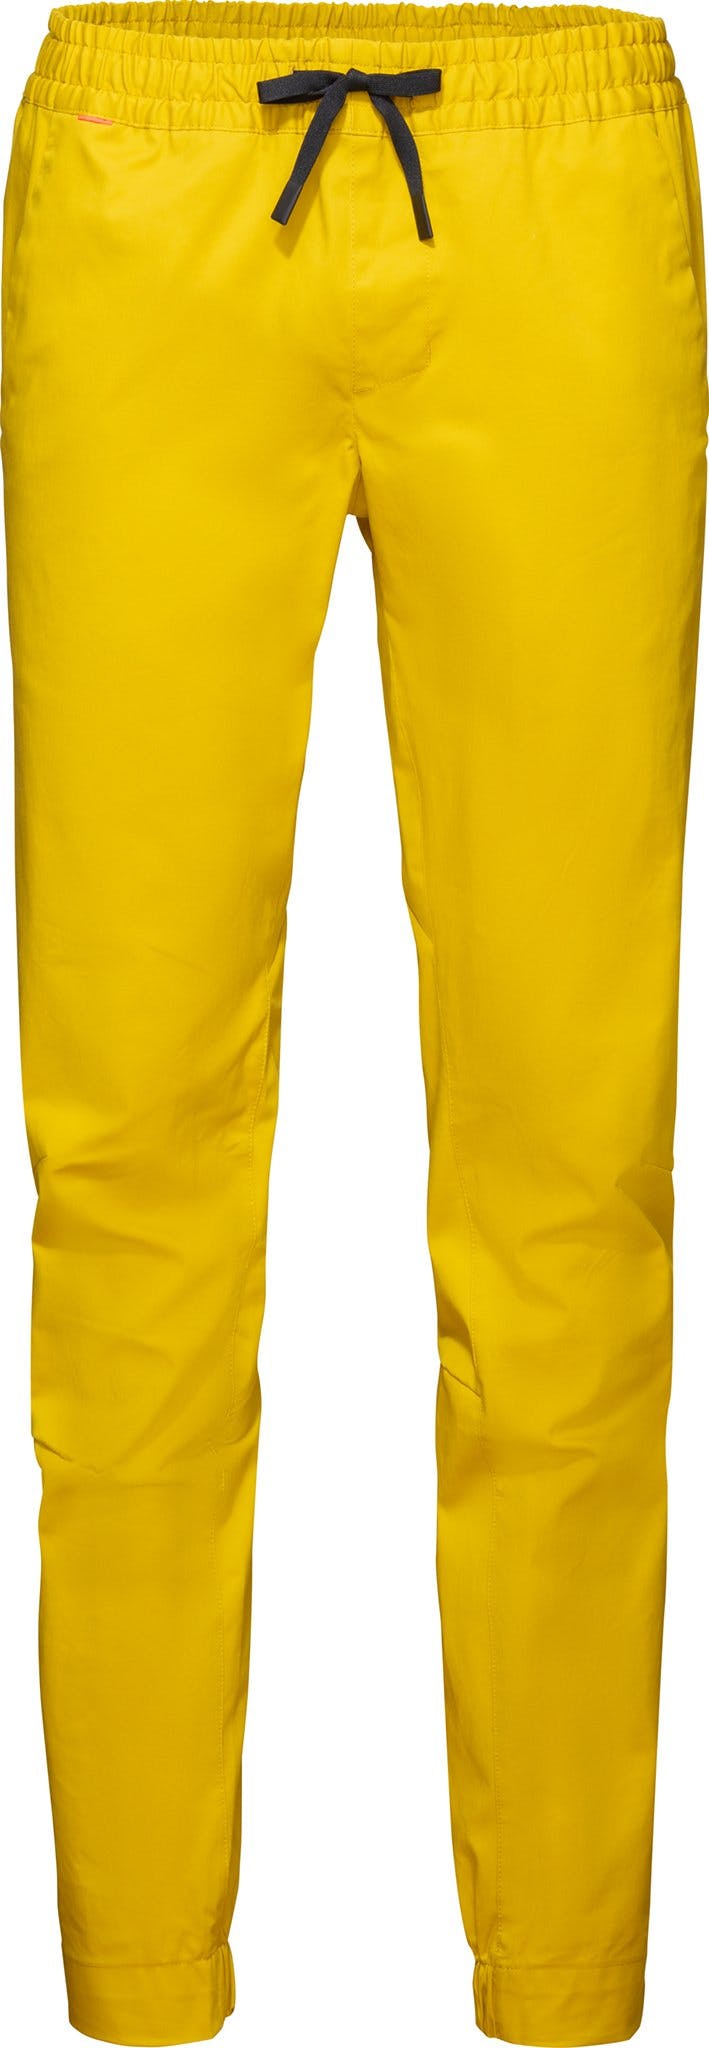 Product image for Camie Pants - Men's